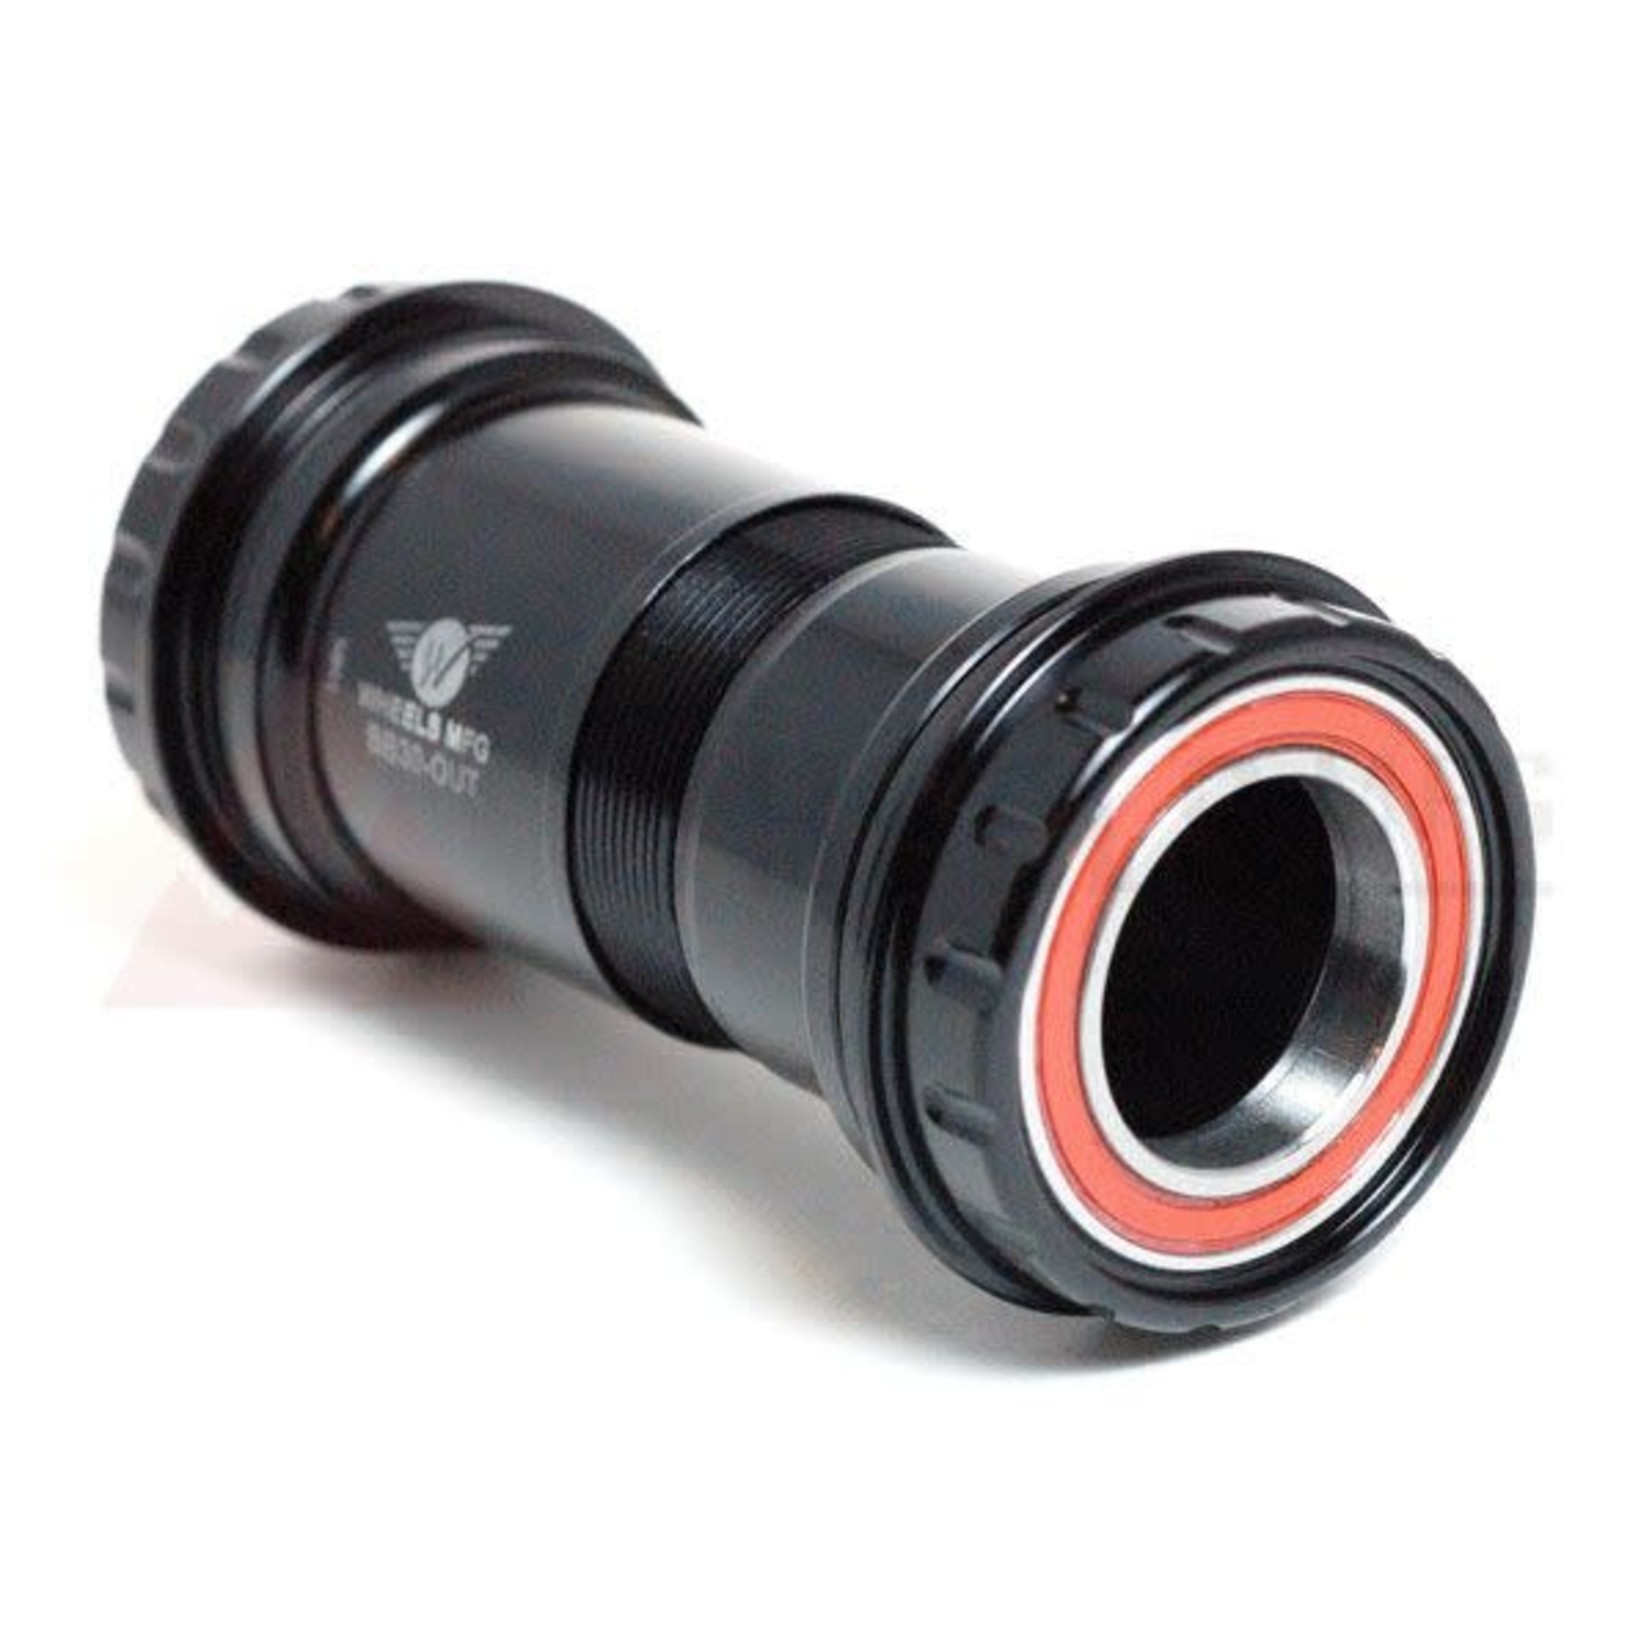 Wheels Manufacturing Wheels Mfg Bottom Bracket - BB30 Outboard Angular Contact BB for 24mm Cranks (Shimano)